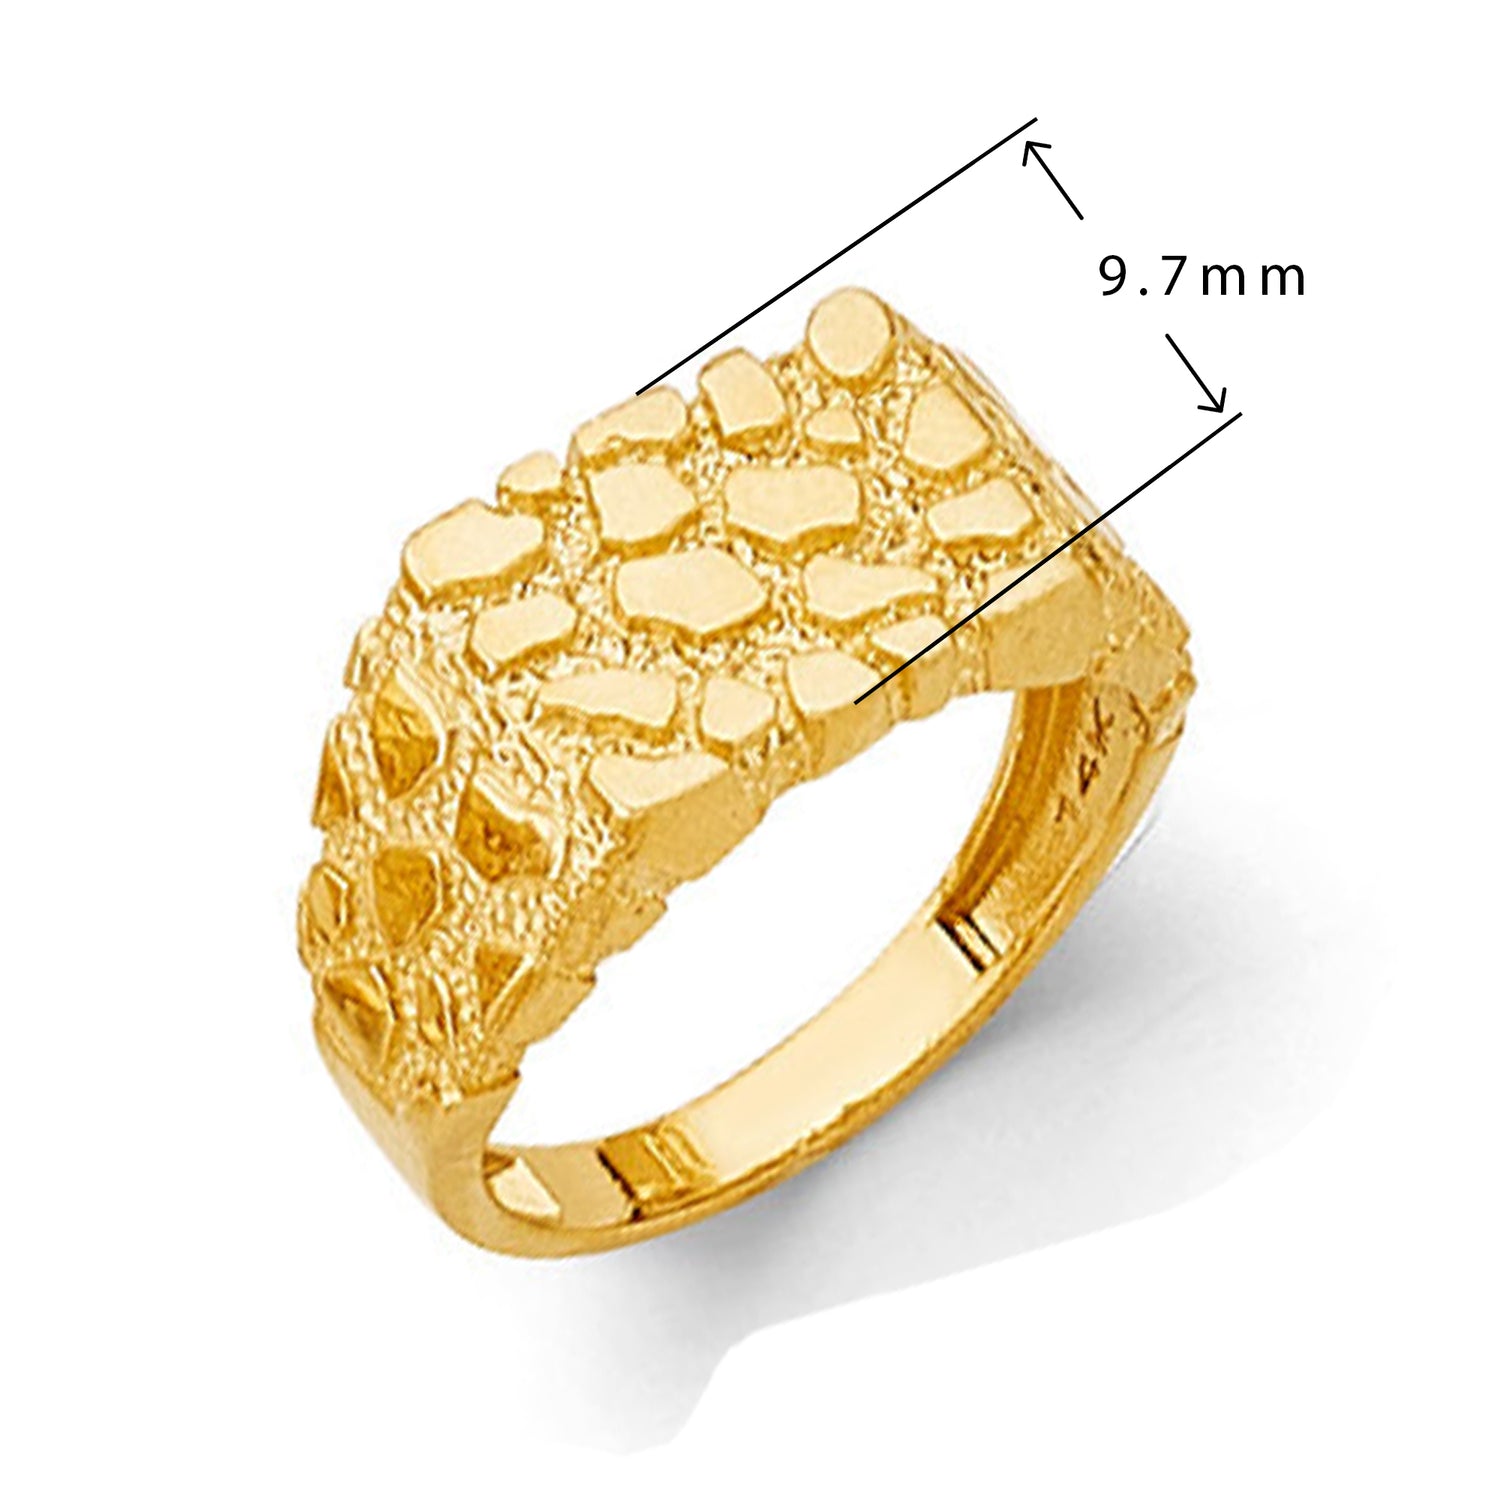 Sophisticated Square Nugget Ring in Solid Gold with Measurement